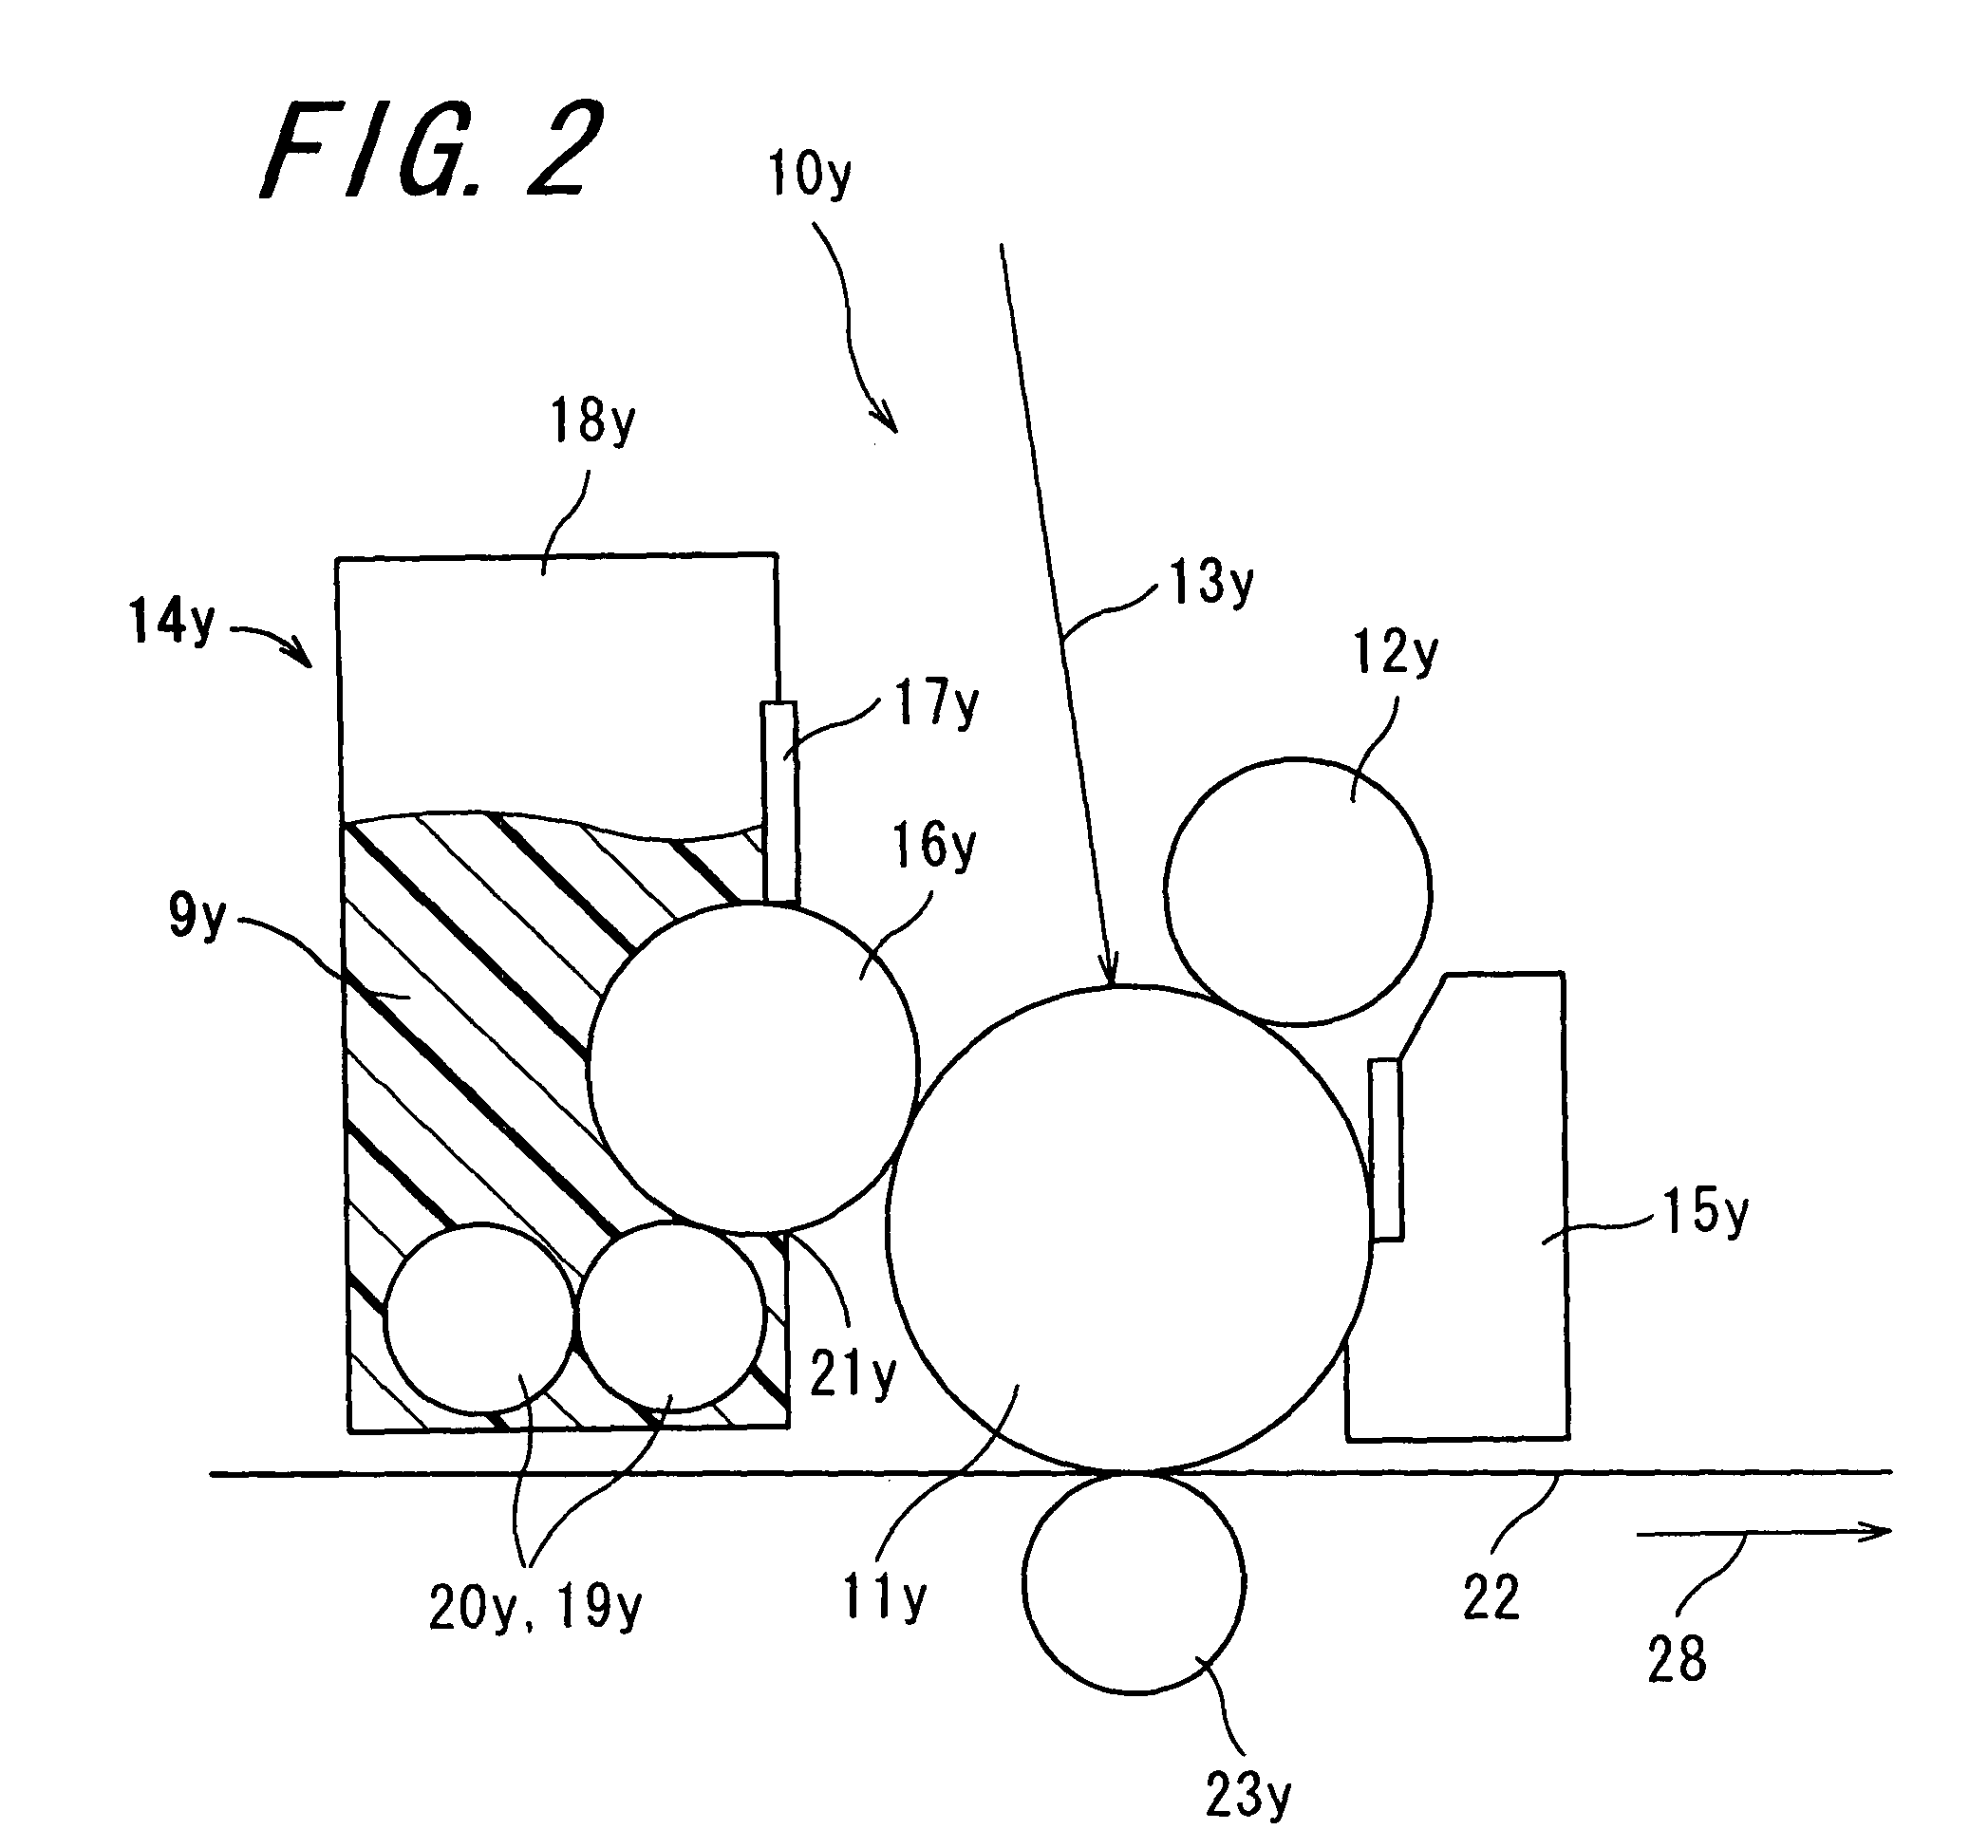 Image forming apparatus controlling a droplet size of a fixing solution